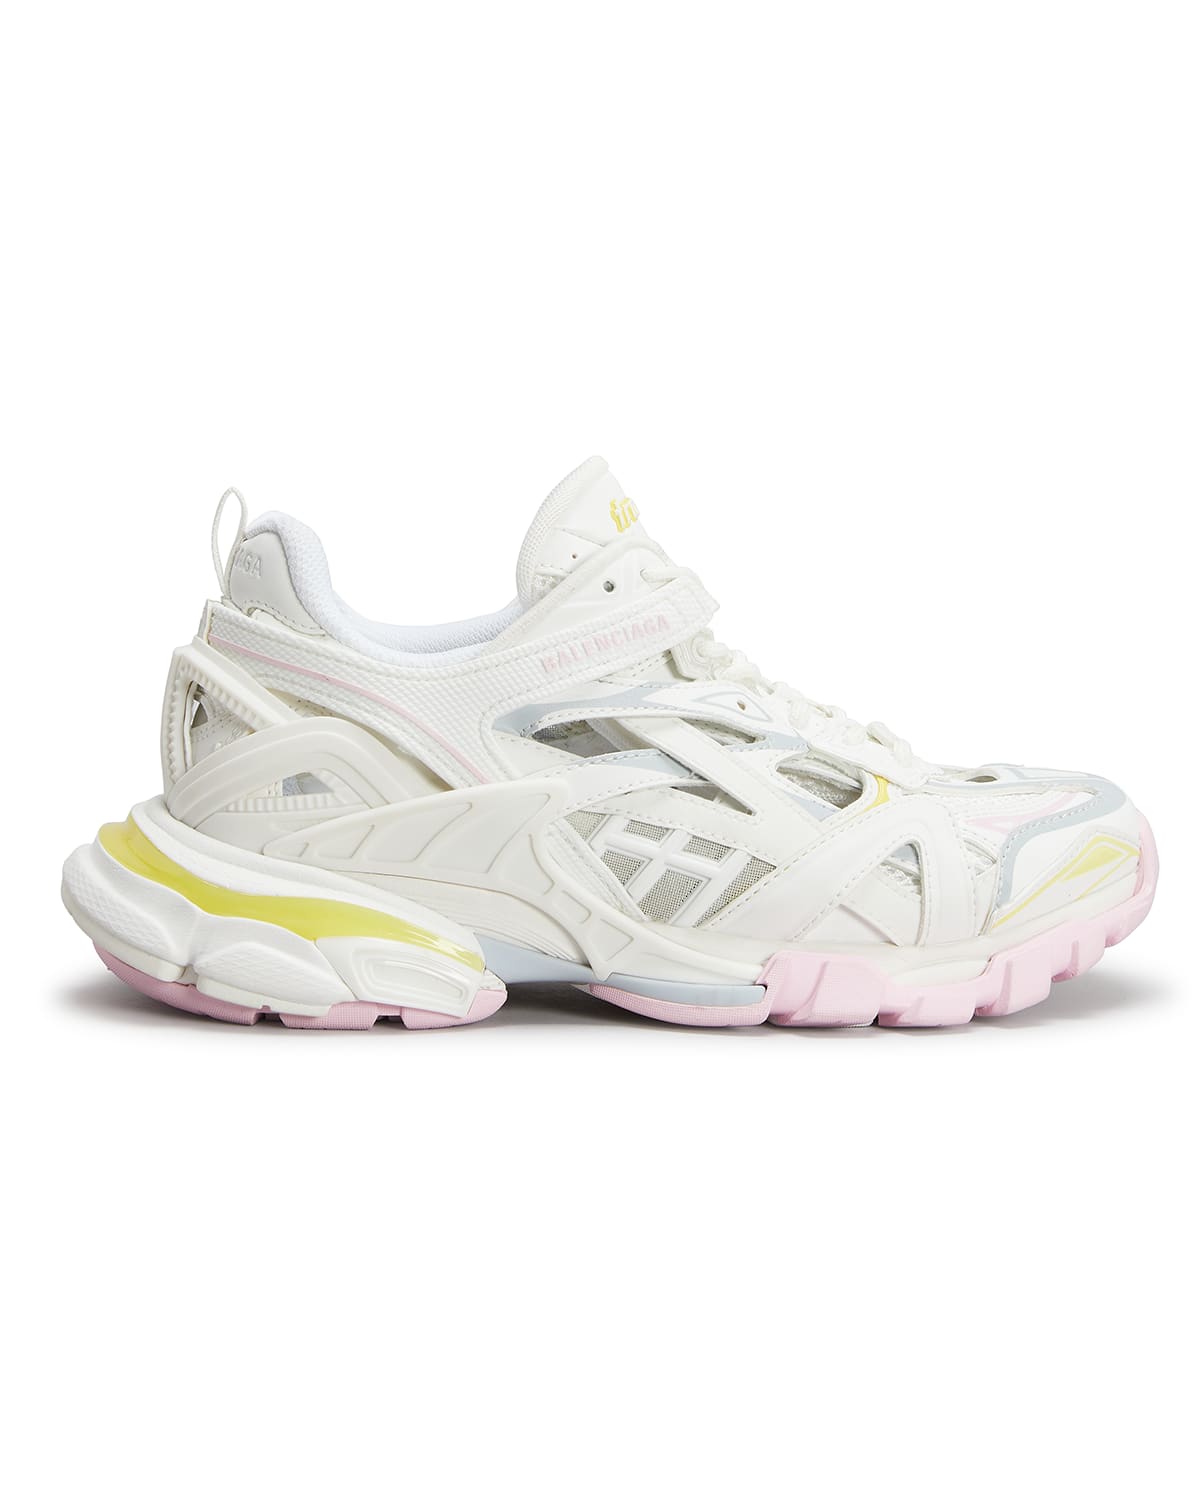 Balenciaga Track 2 Caged Trainer Sneakers